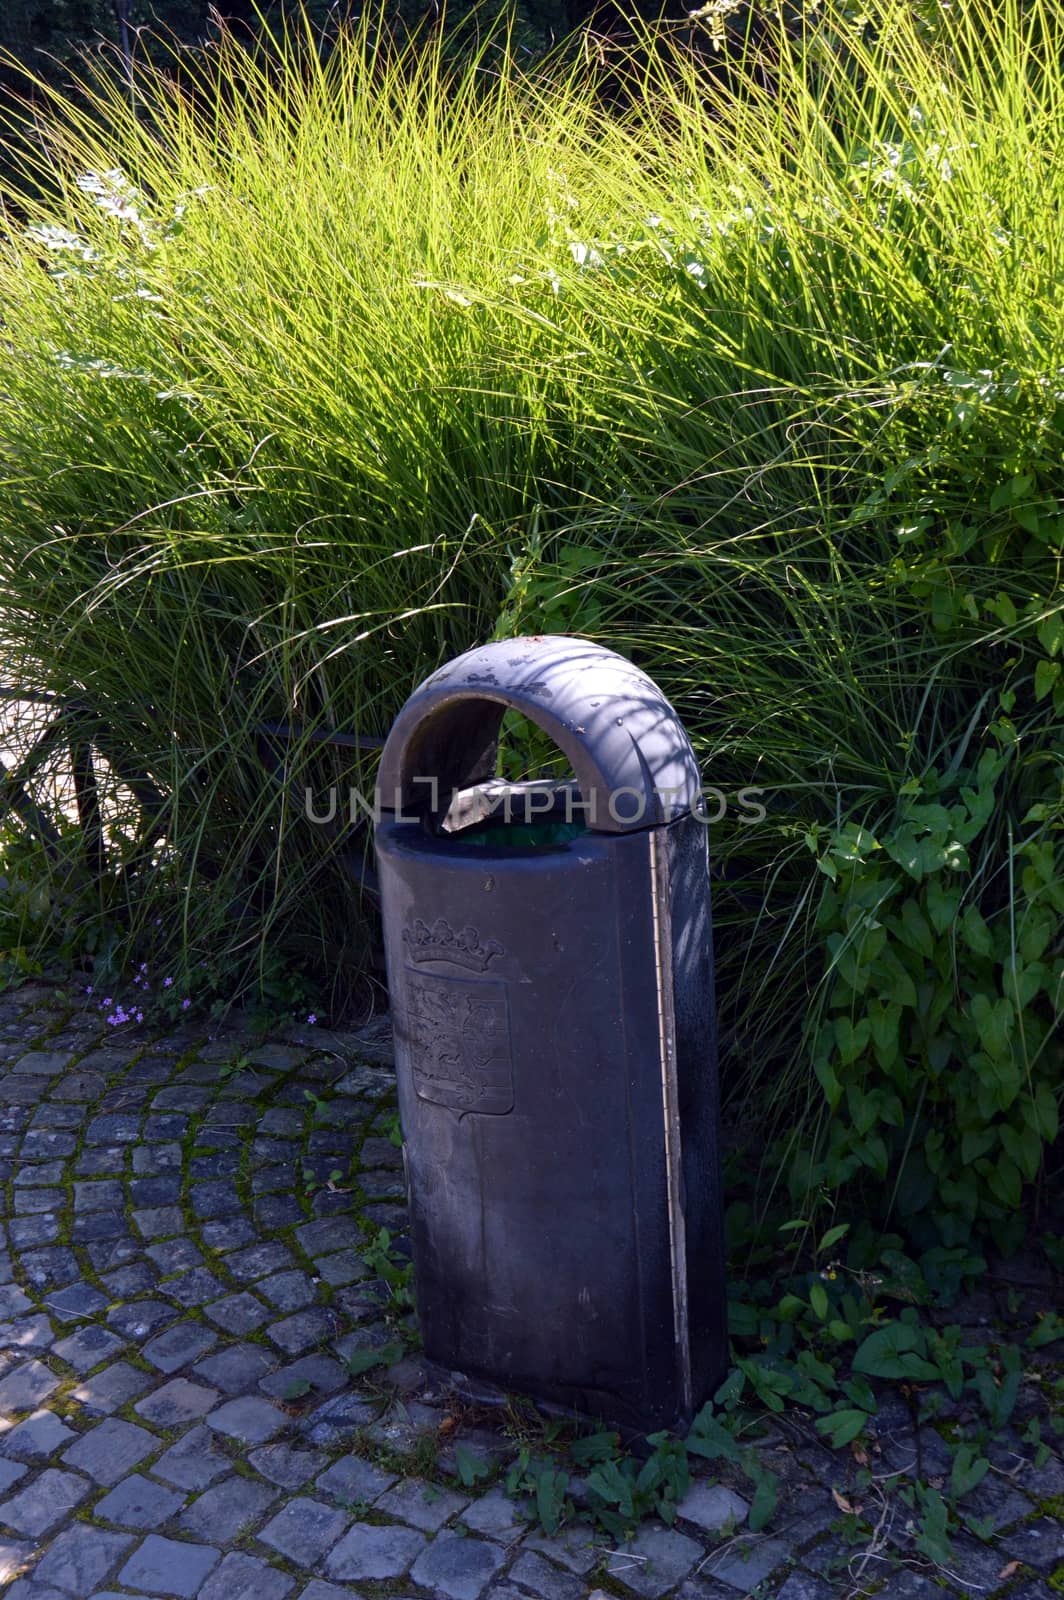 Tub trash can on a picket . by Philou1000